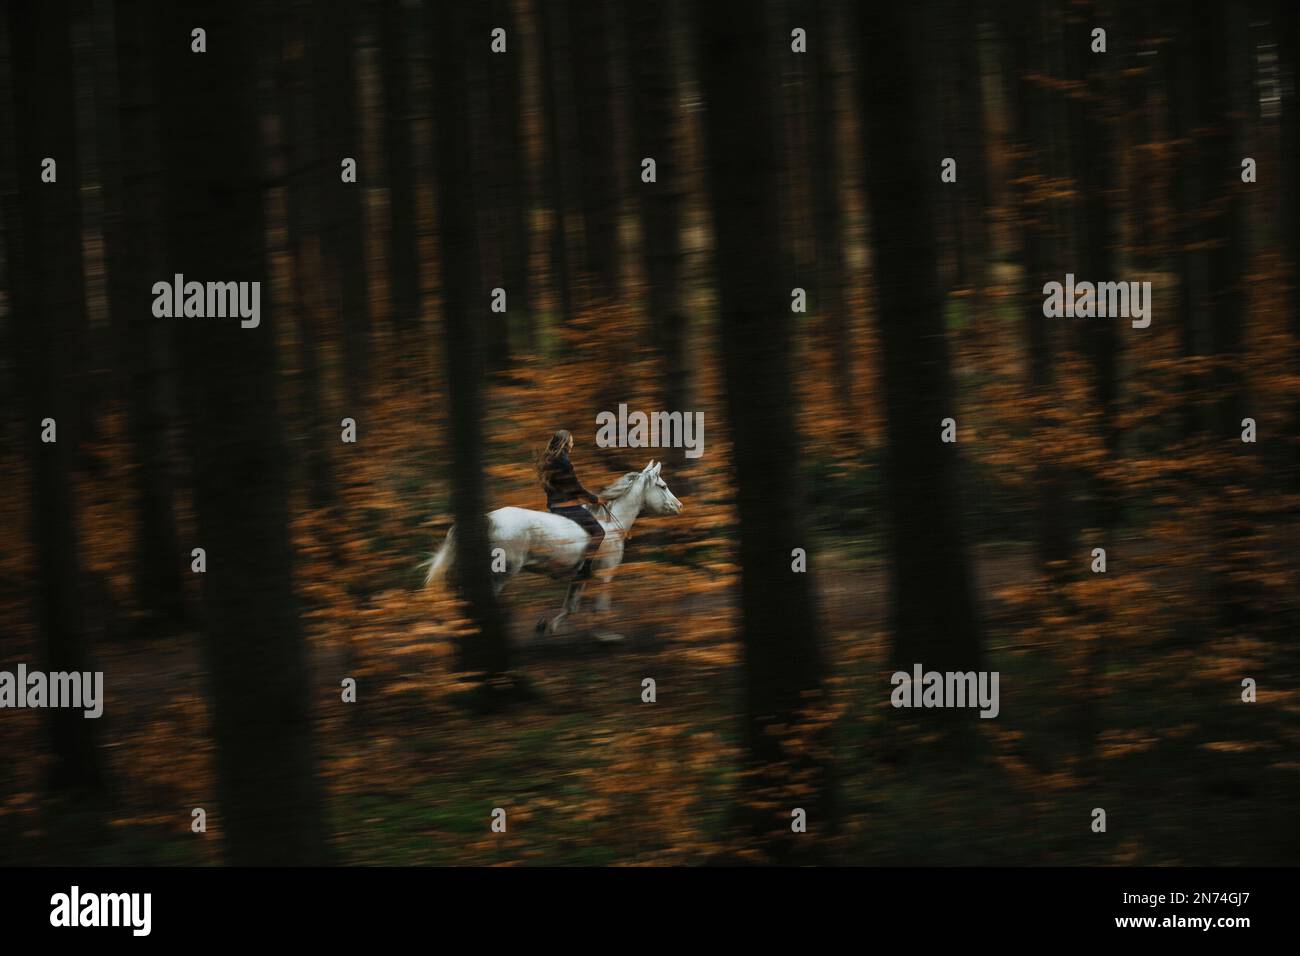 Woman on white horse in forest, without saddle Stock Photo